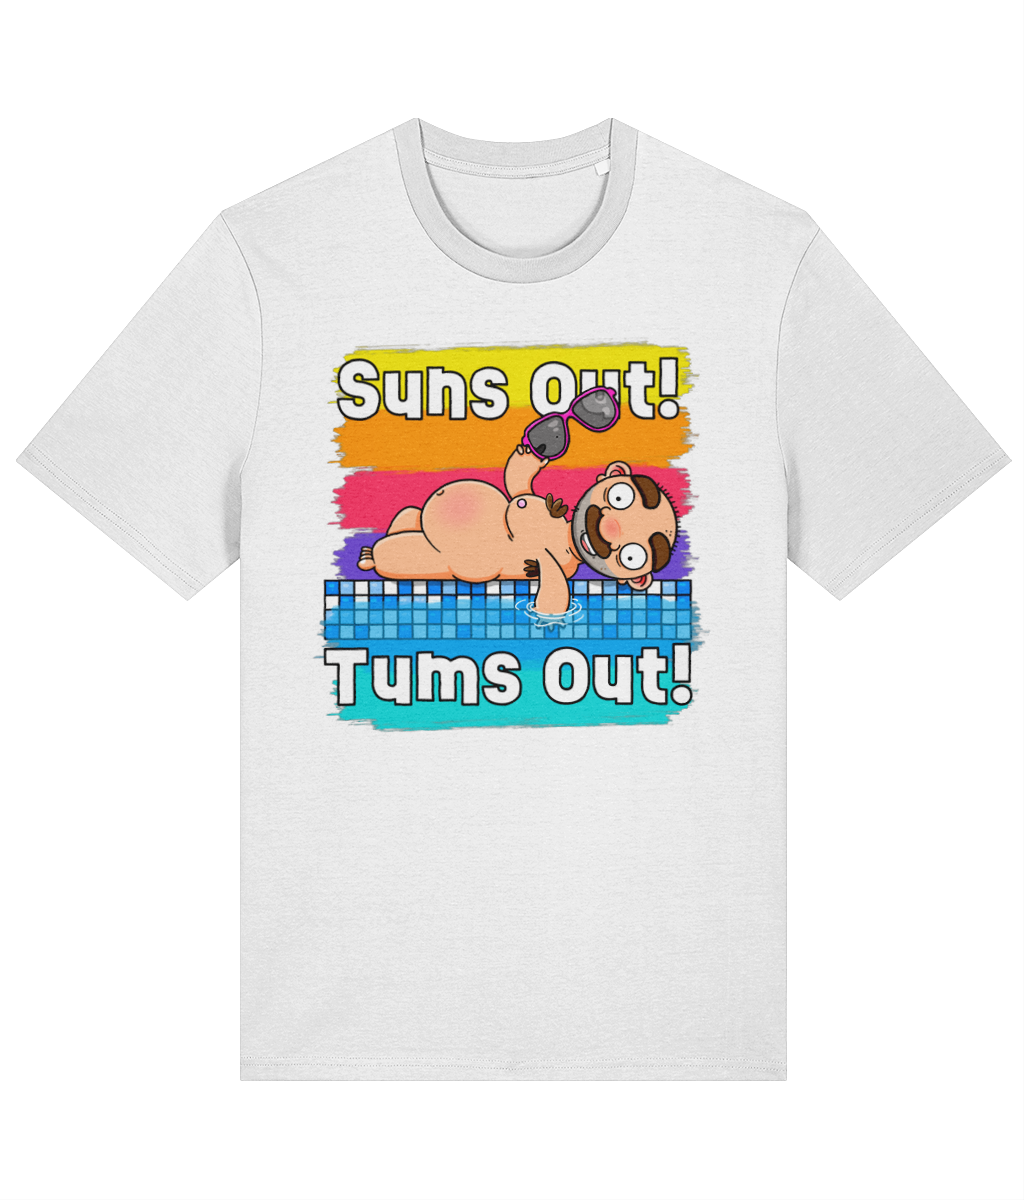 Suns out! Tums out! (Alternative Version) T-Shirt